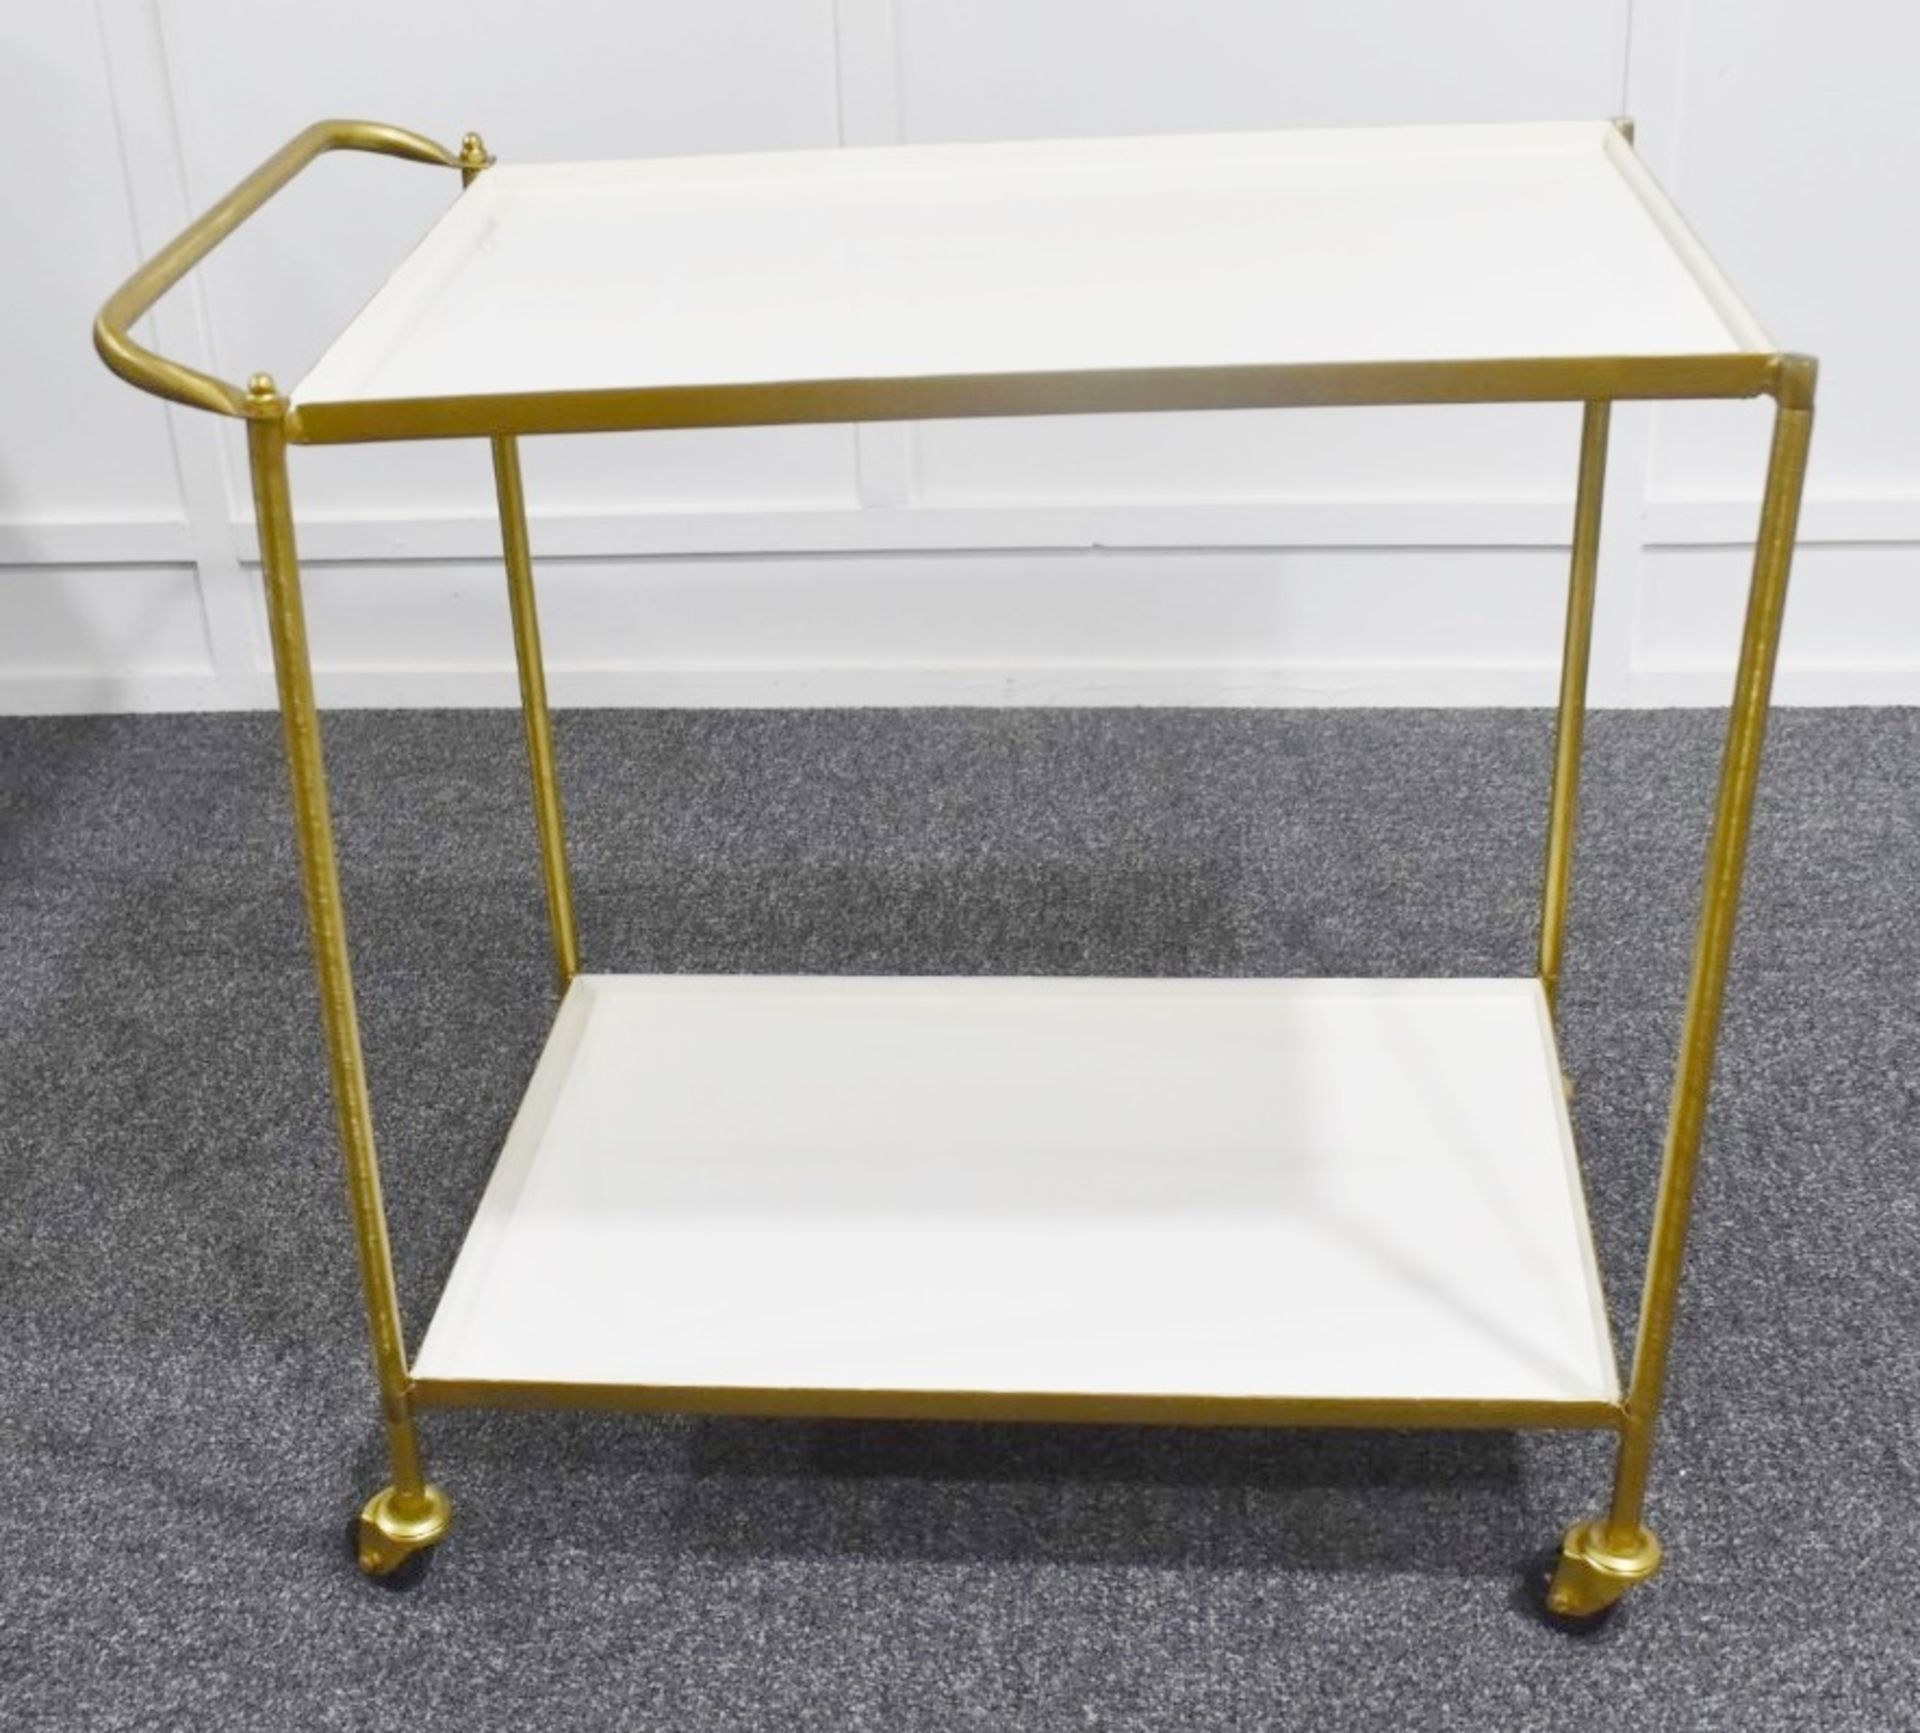 1 x Retro 1960s-style Solid Brass Drink & Dessert Trolley Bar Cart on Castors - Recently Removed - Image 4 of 7